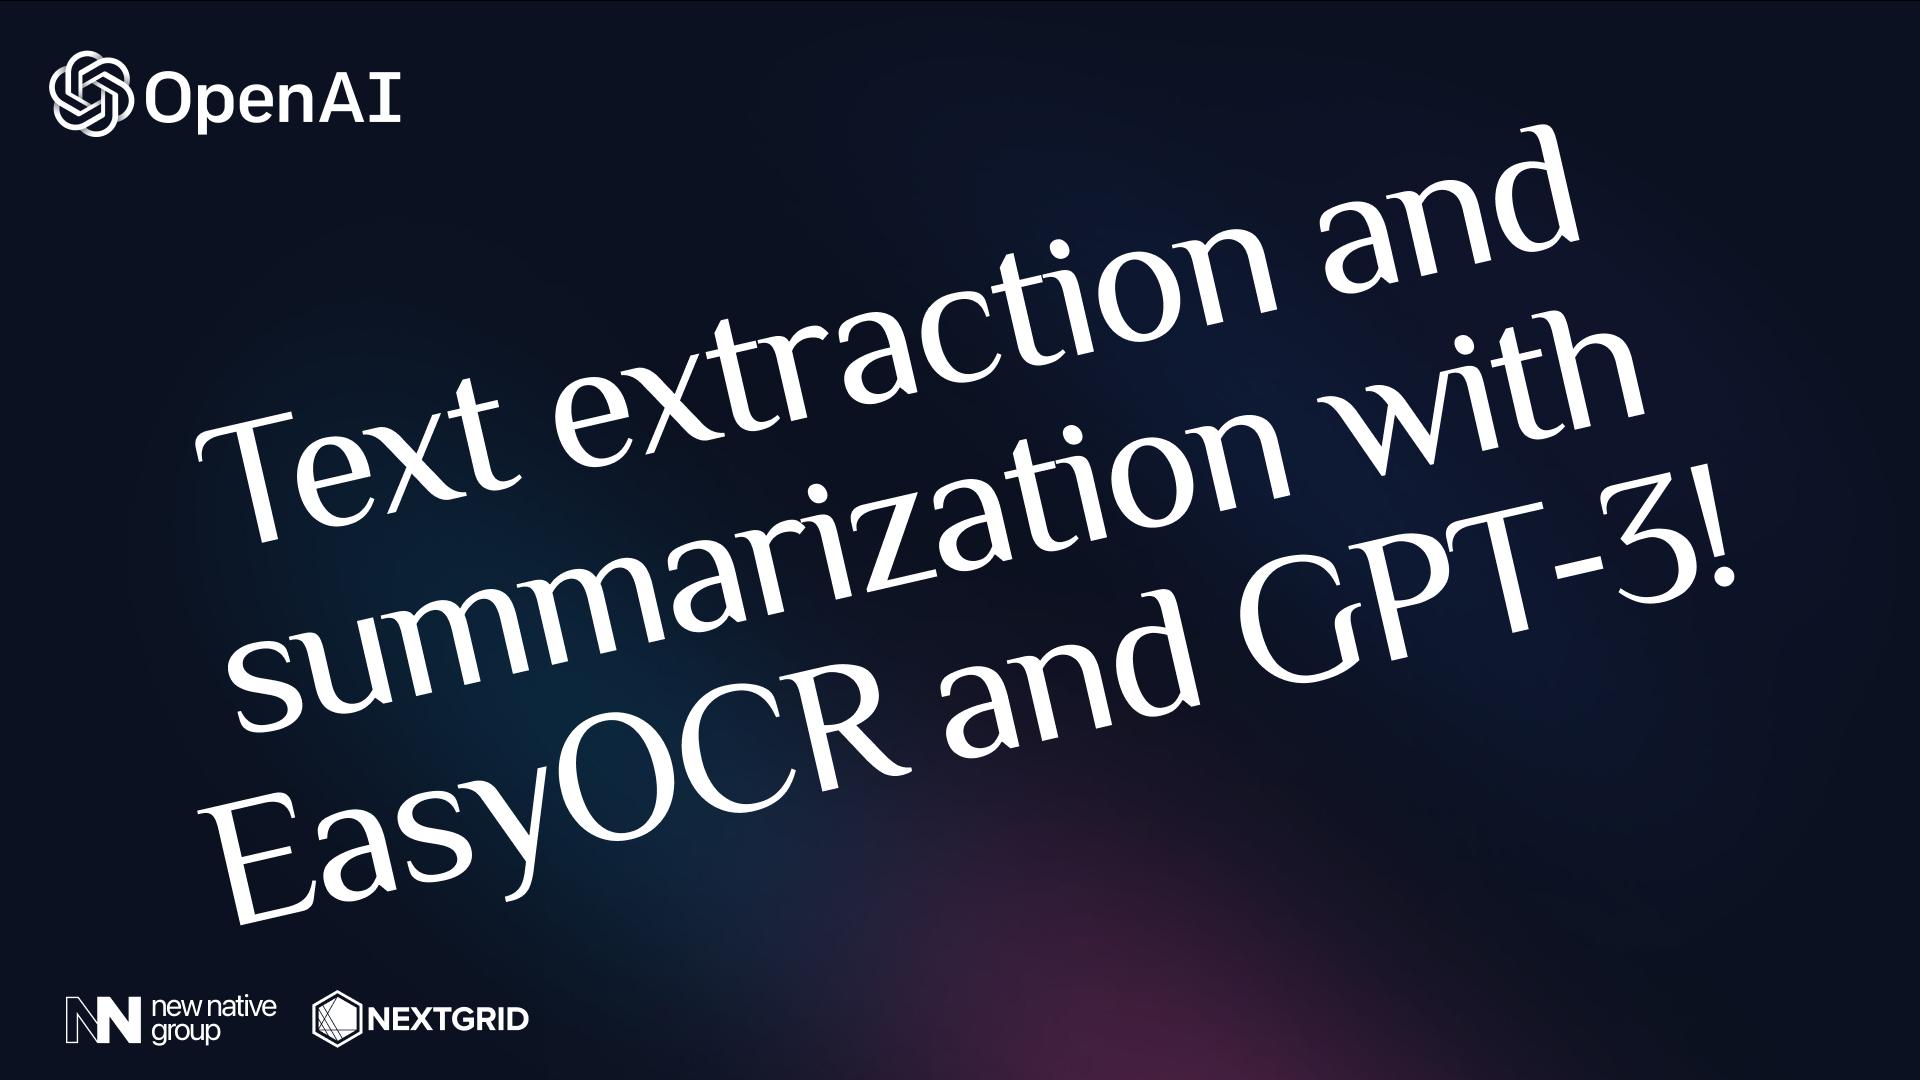 EasyOCR tutorial: Text extraction and summarization with EasyOCR and GPT-3! tutorial